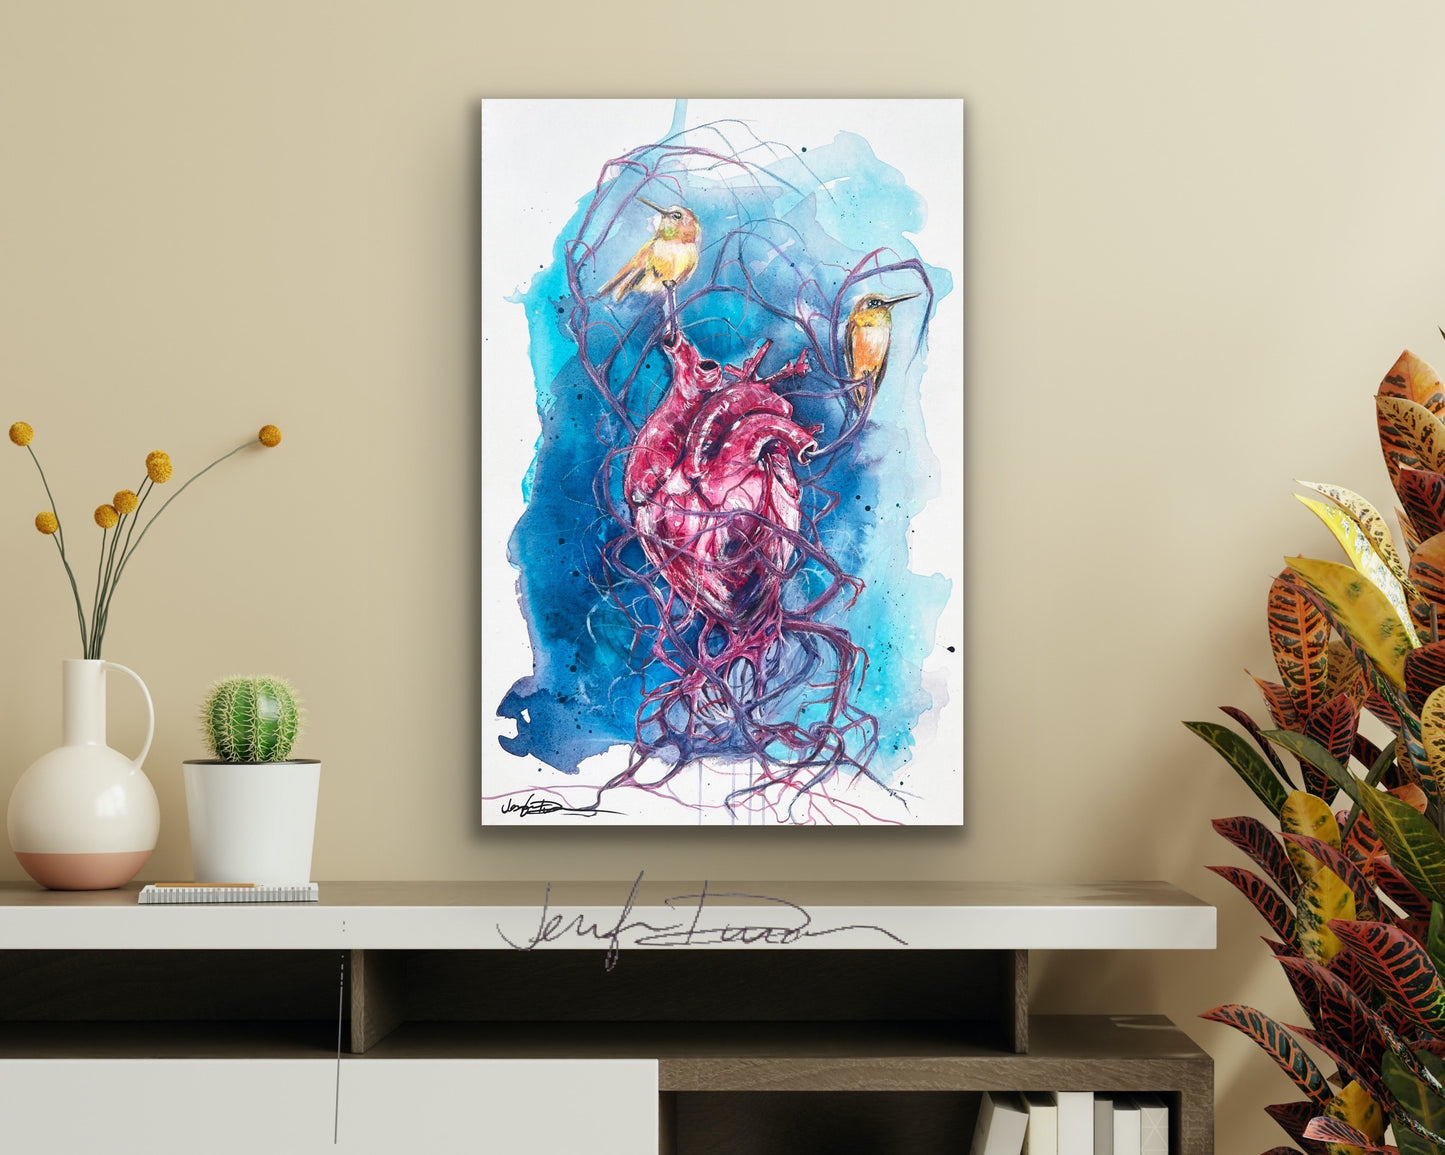 Abstract Modern Heart Watercolor Painting with Hummingbirds Wall Art By Jen Duran